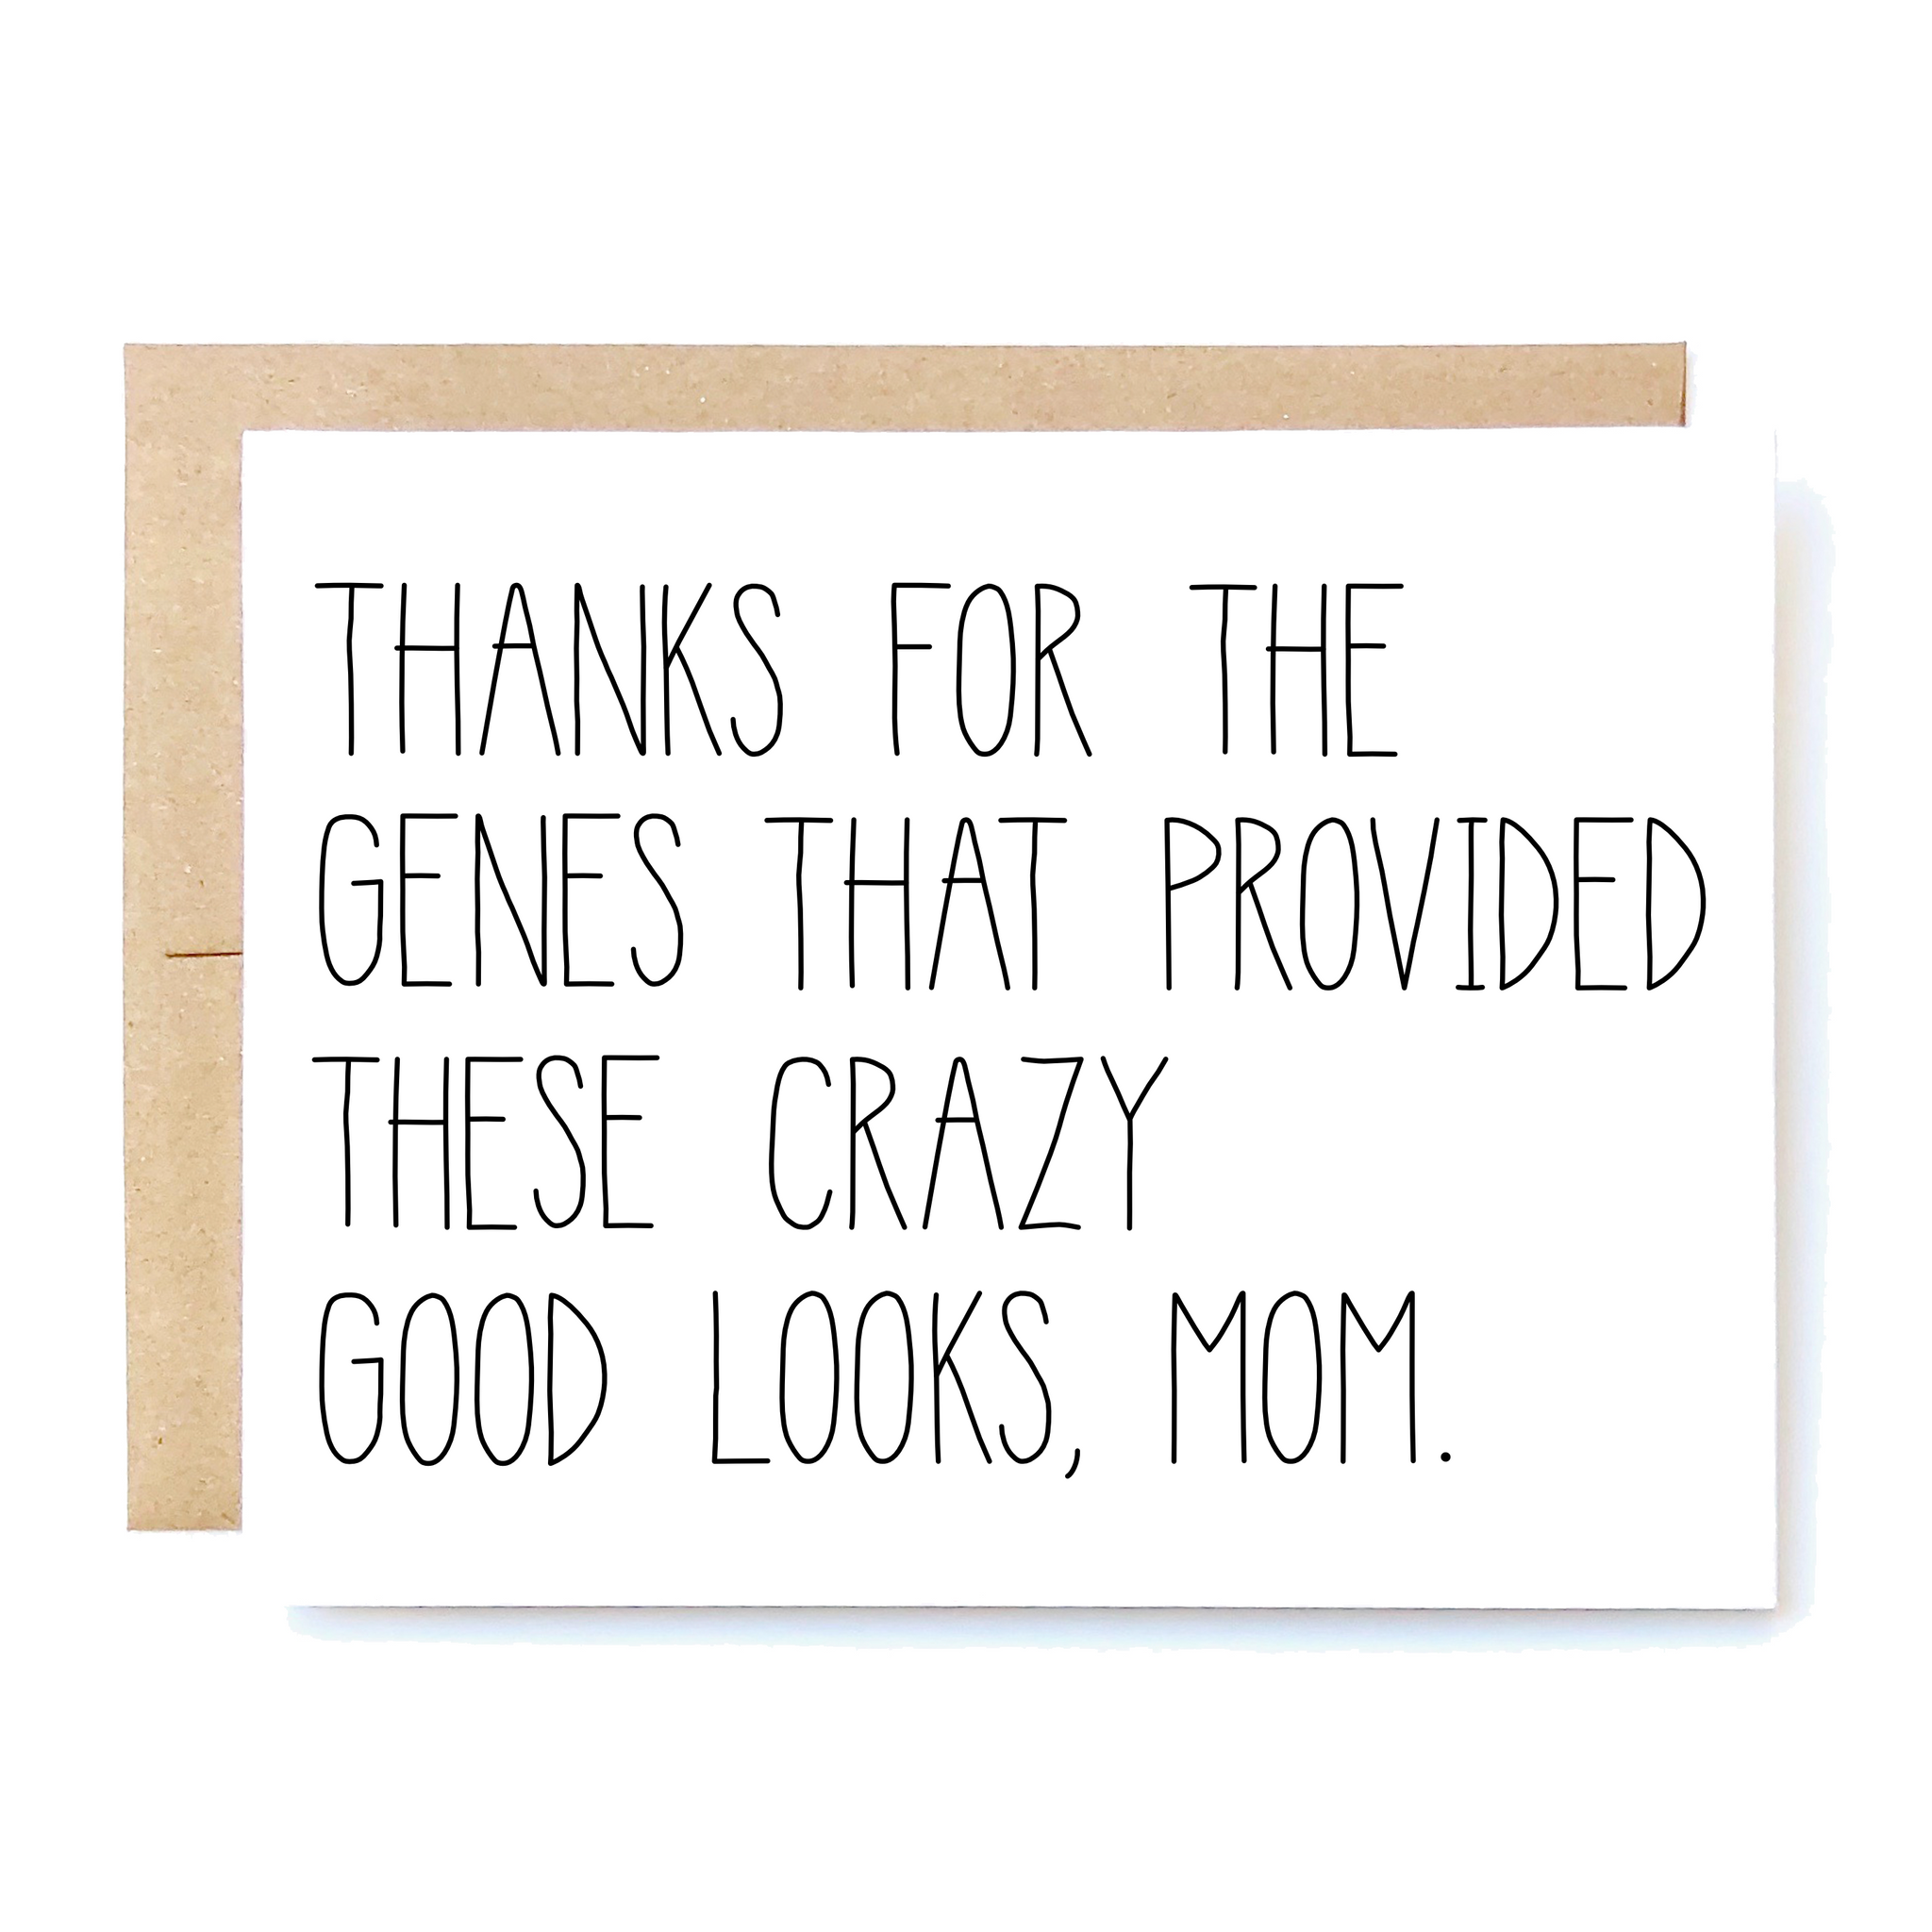 Card Front: Thanks for the genes that provided these crazy good looks, mom.